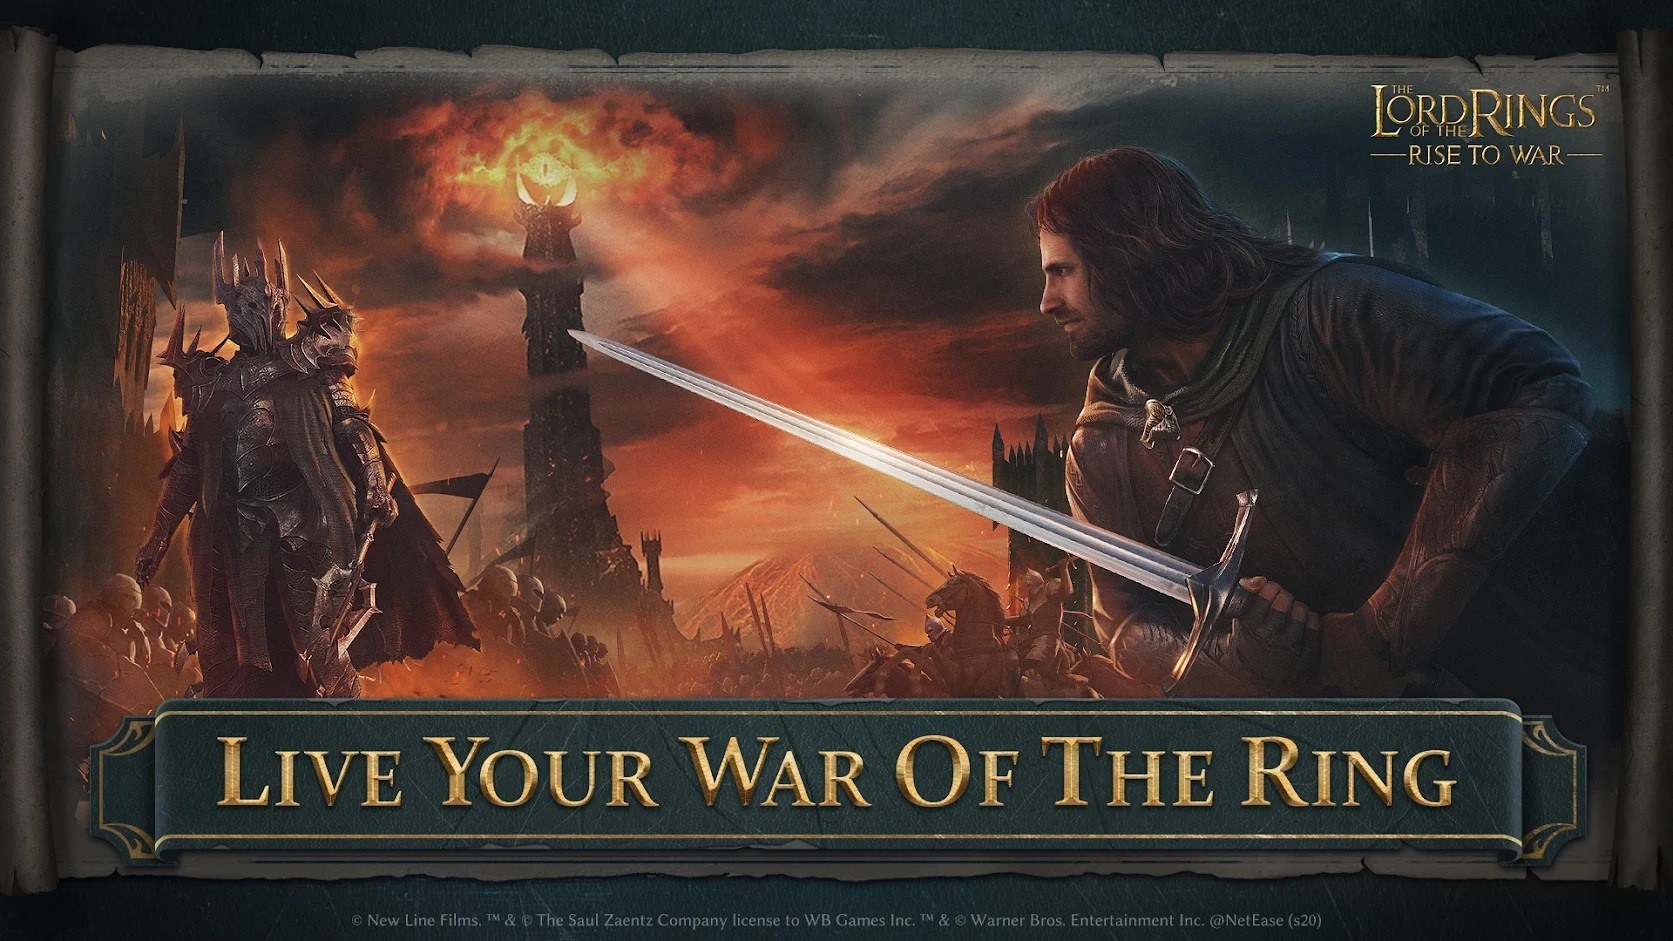 The Lord of the Rings: War na PC z BlueStacks